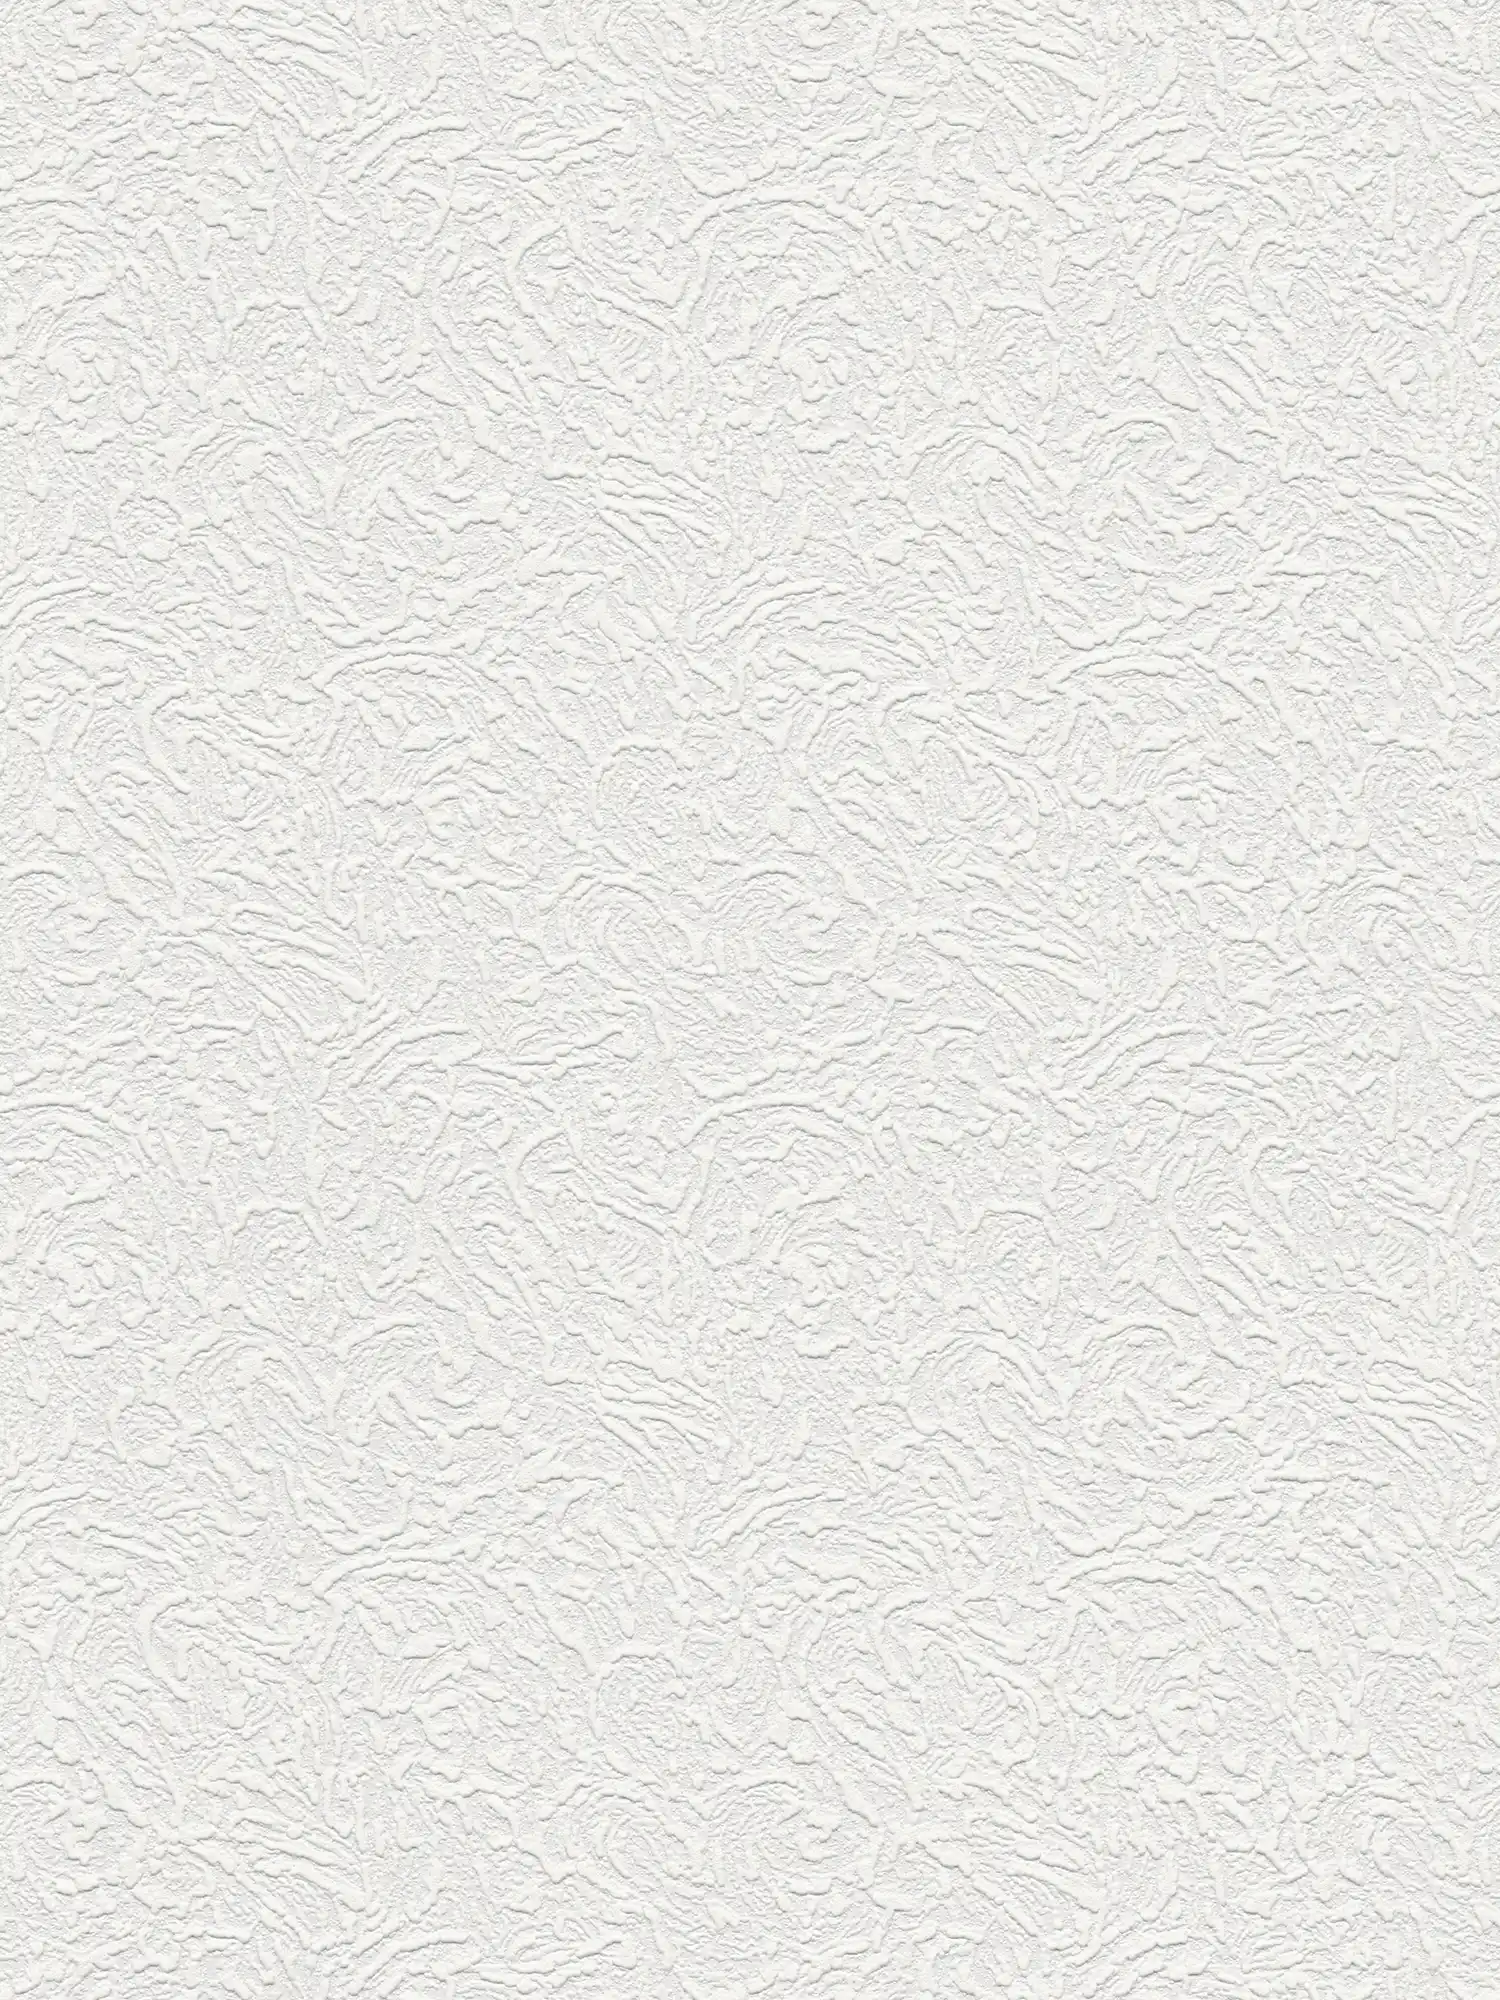 Wallpaper with foam structure in plaster look - white
